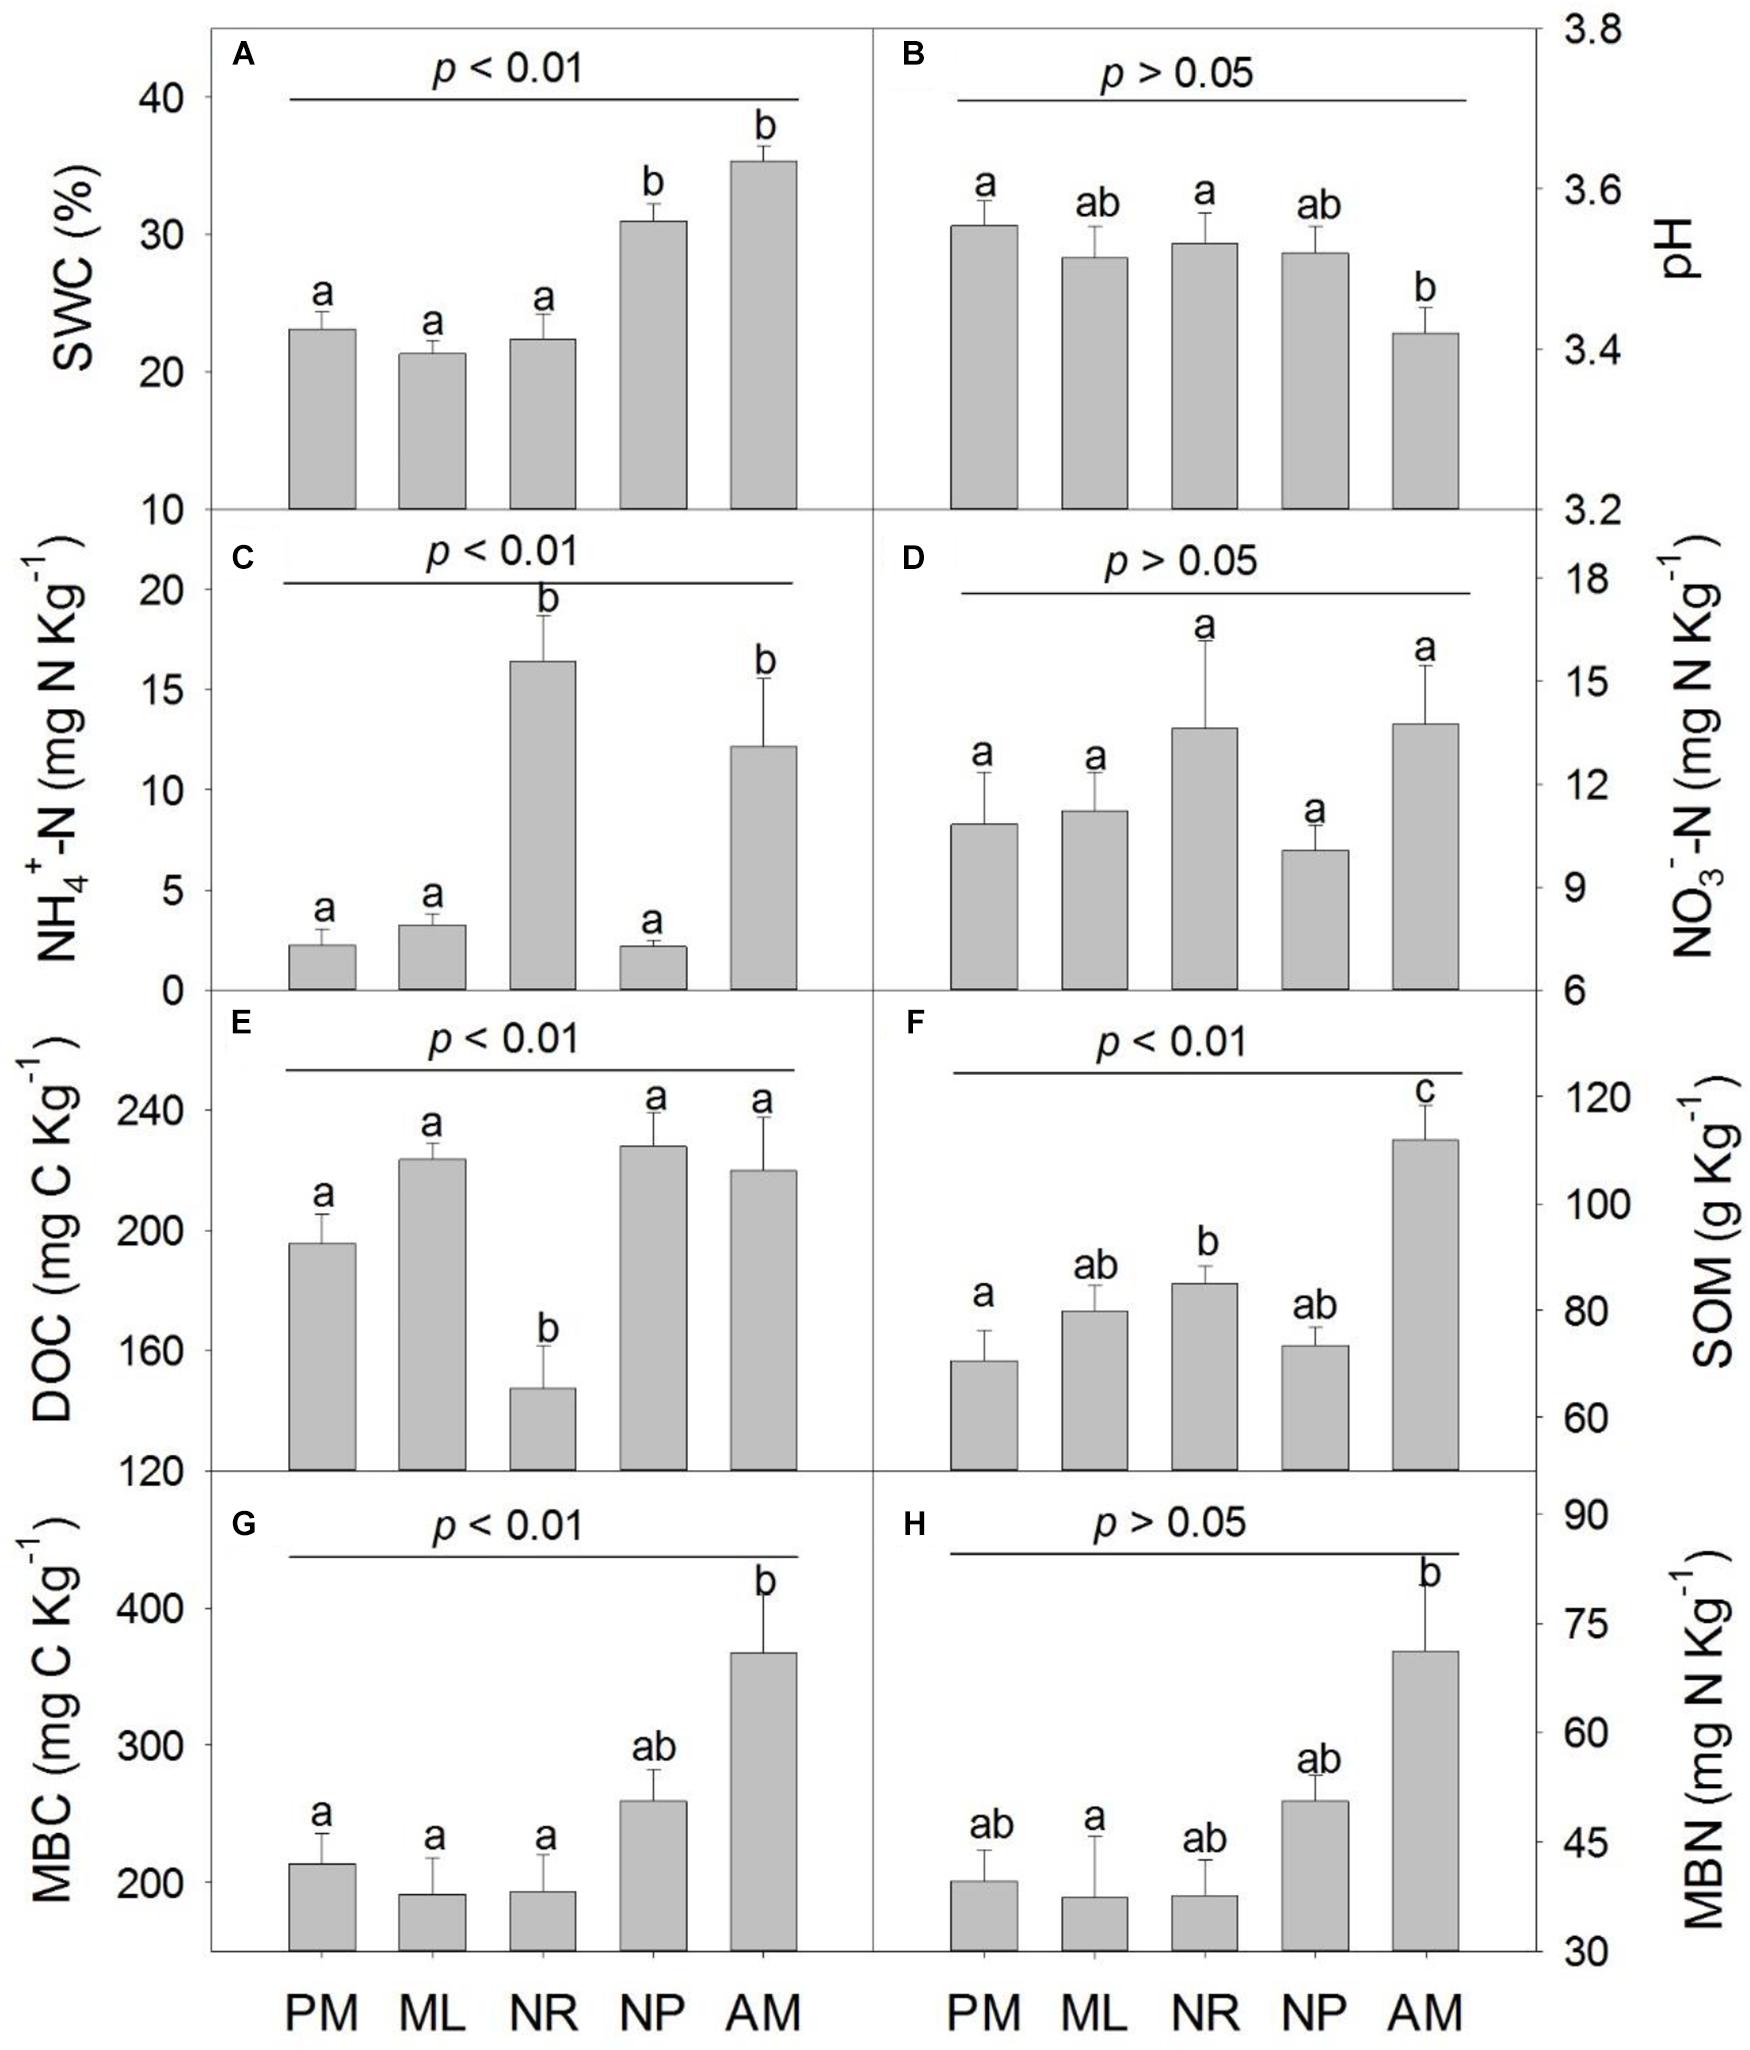 Frontiers The Composition Of Nitrogen Fixing Microorganisms Correlates With Soil Nitrogen Content During Reforestation A Comparison Between Legume And Non Legume Plantations Microbiology